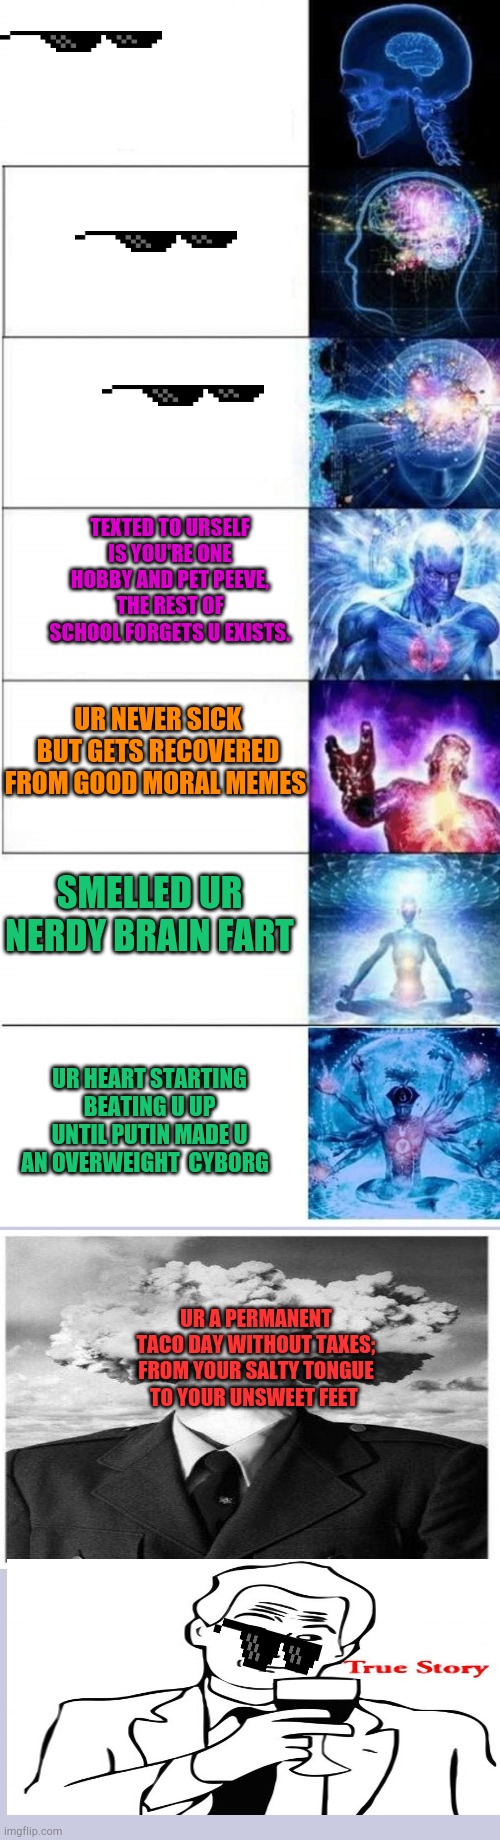 Exploding brain | SMELLED UR NERDY BRAIN FART UR NEVER SICK BUT GETS RECOVERED FROM GOOD MORAL MEMES TEXTED TO URSELF IS YOU'RE ONE HOBBY AND PET PEEVE, THE R | image tagged in exploding brain | made w/ Imgflip meme maker